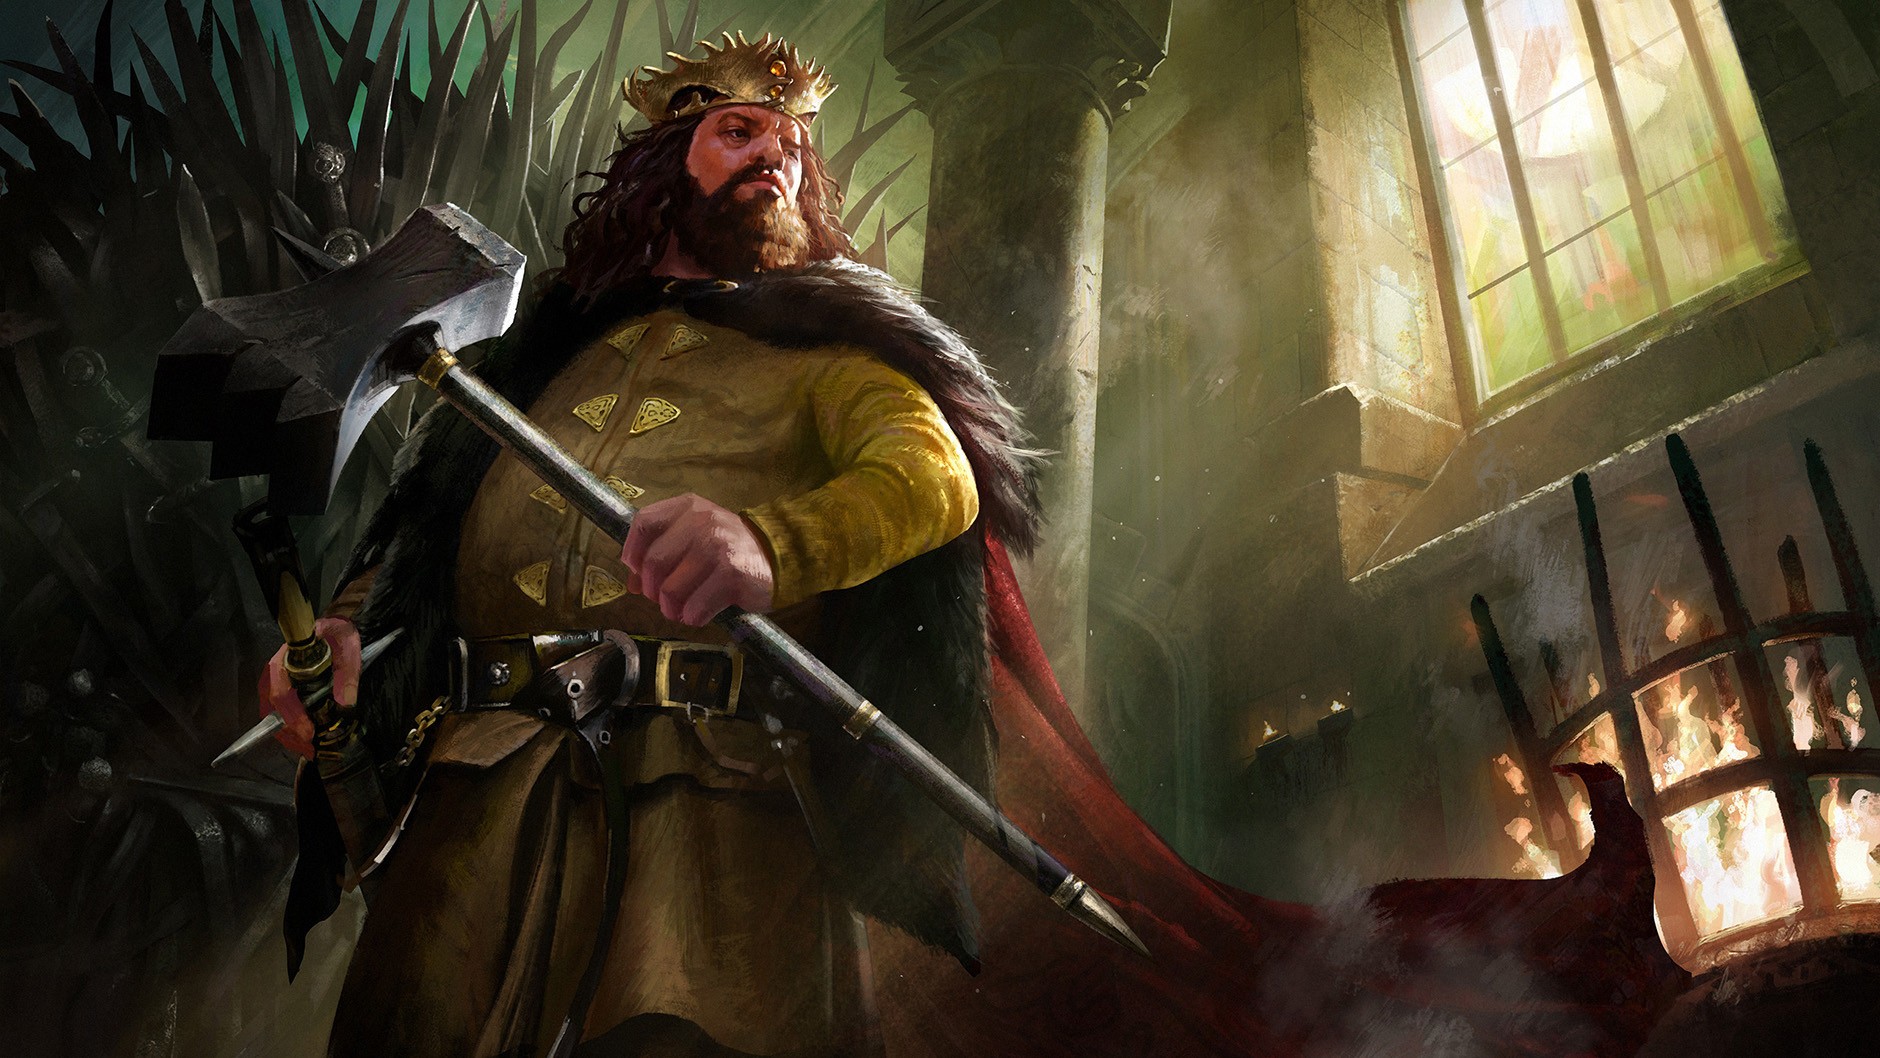 Digital Art Fantasy Art Game Of Thrones Robert Baratheon A Song Of Ice And Fire 1880x1058